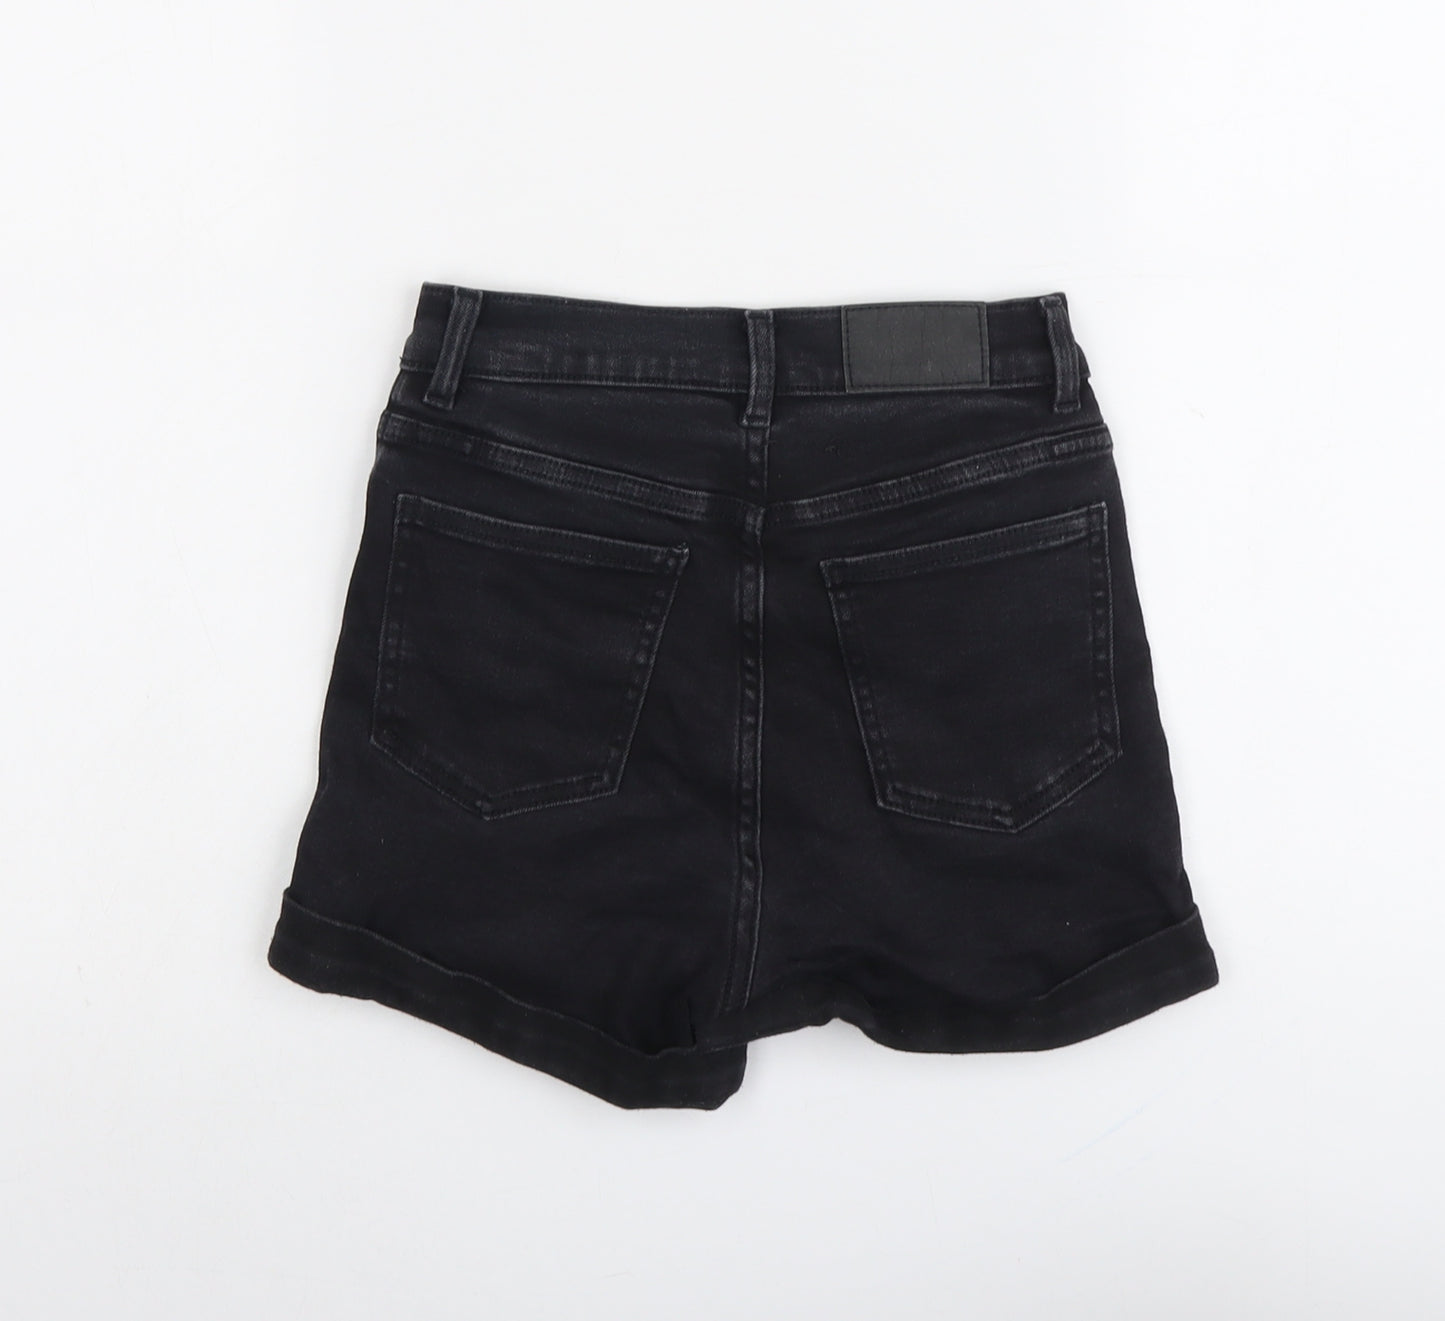 Monki Womens Black Cotton Hot Pants Shorts Size 24 in L3 in Regular Button